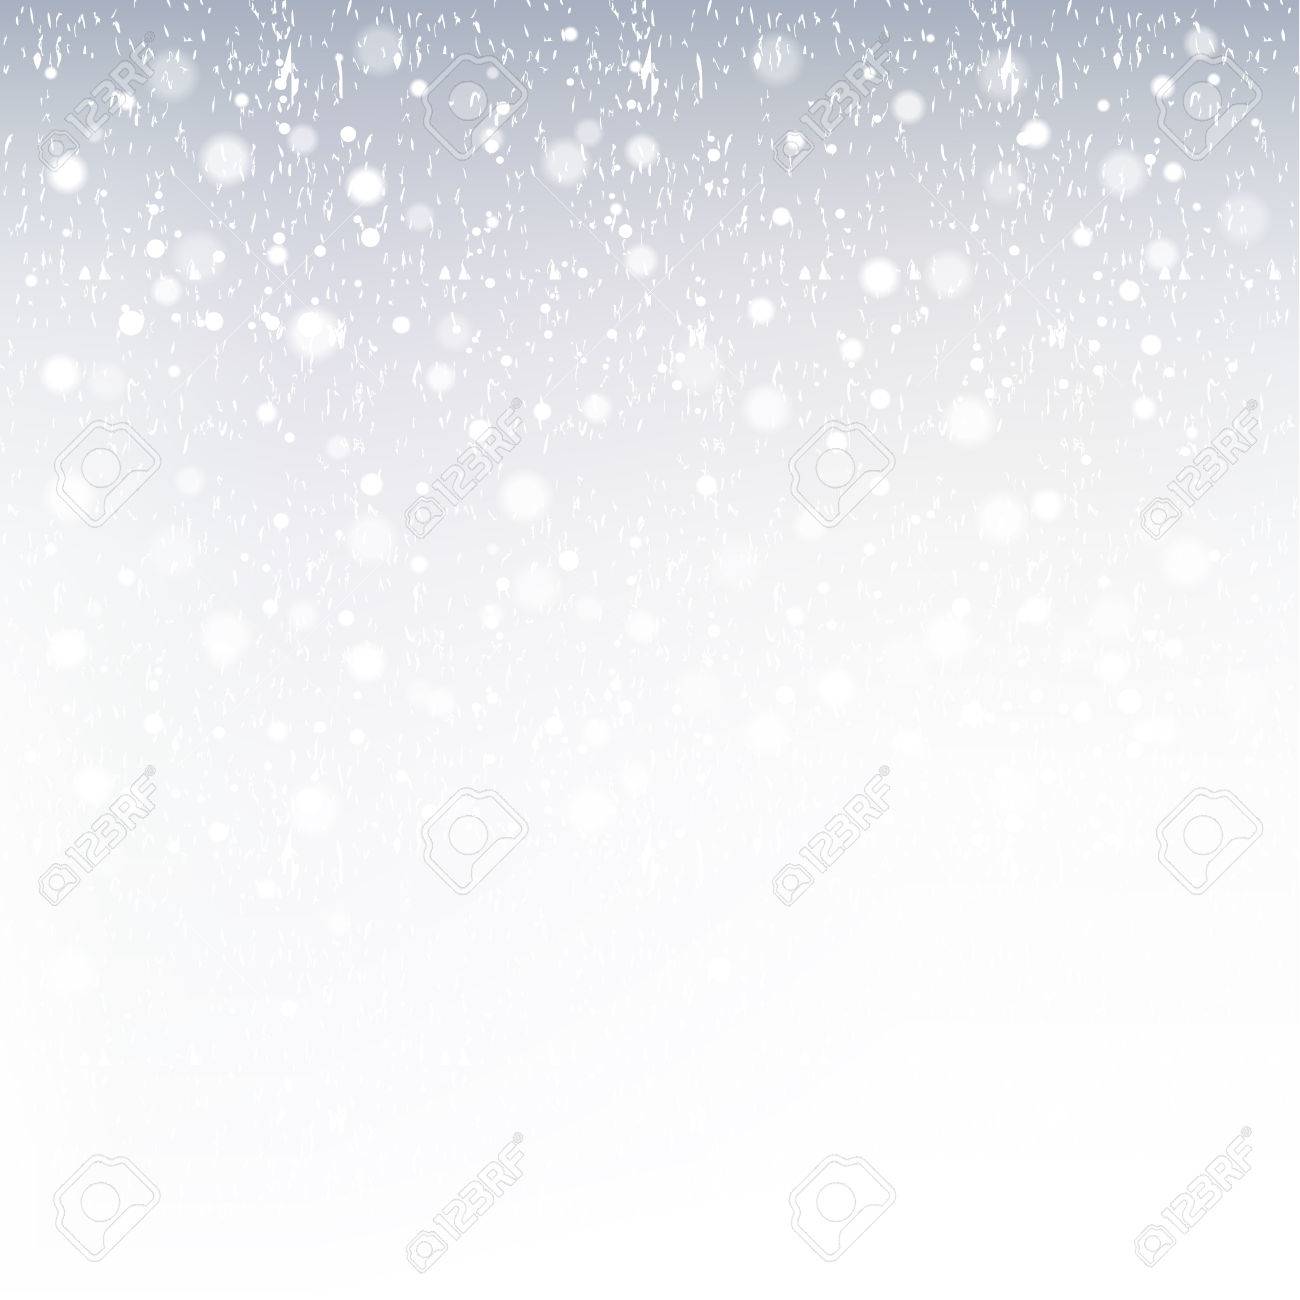 Clipart Snow No Background & Free Clip Art Images #29526.